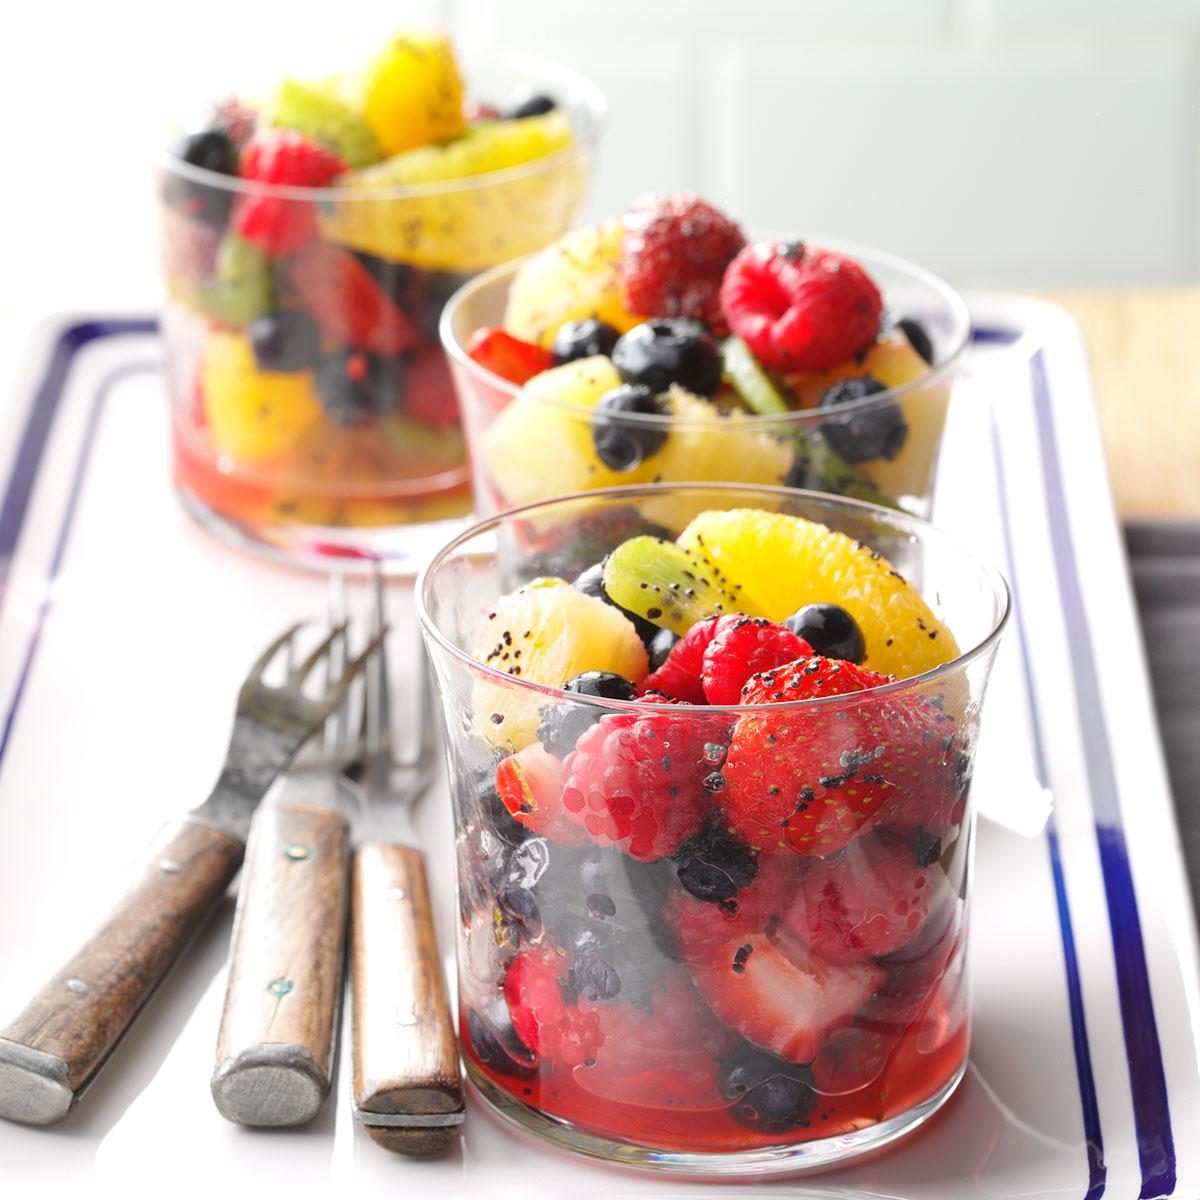 40 Stunning Fruit Salad Recipes You Can Make for Every Occasion